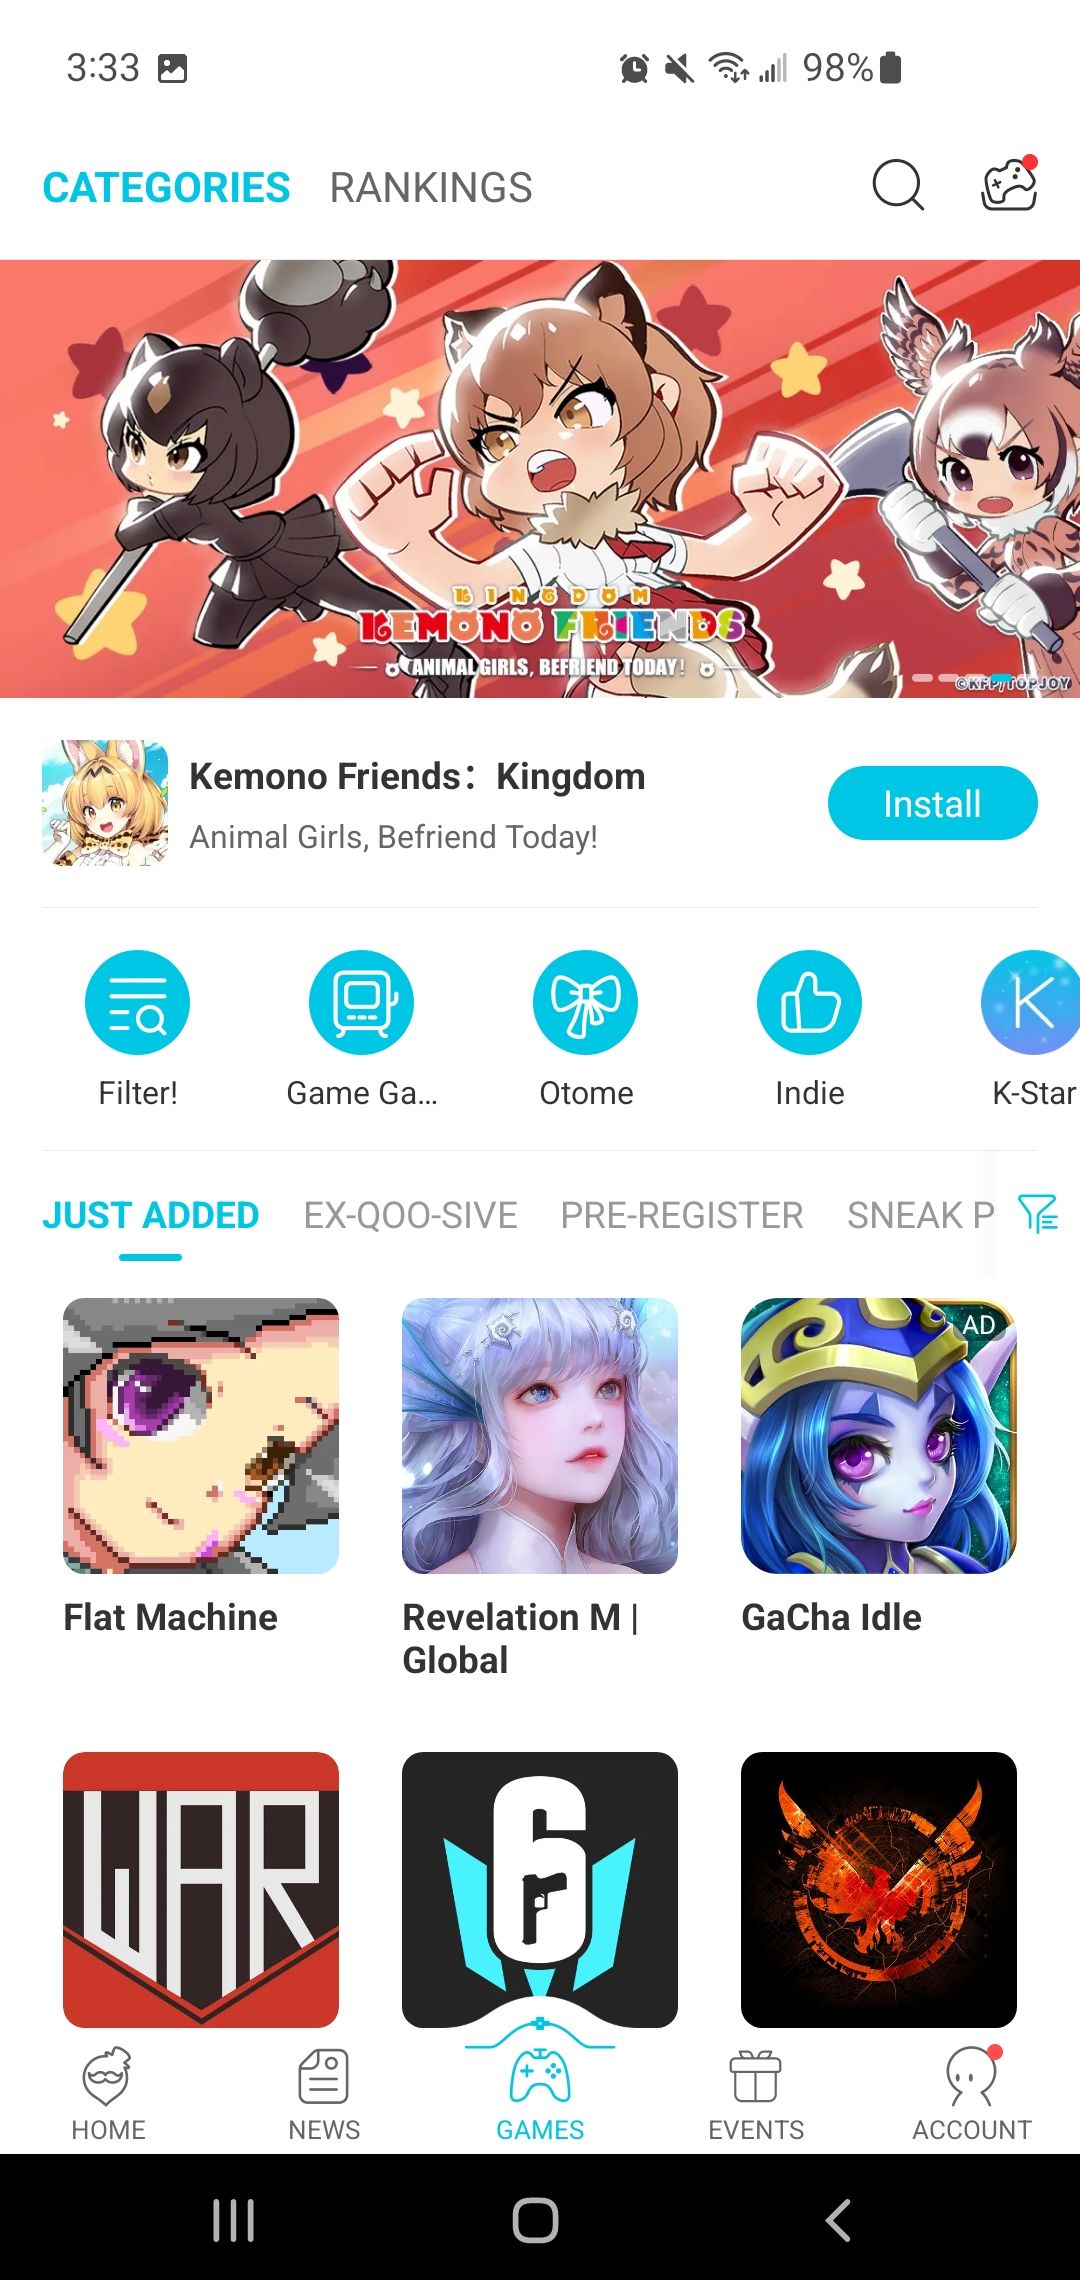 Games category page in QooApp